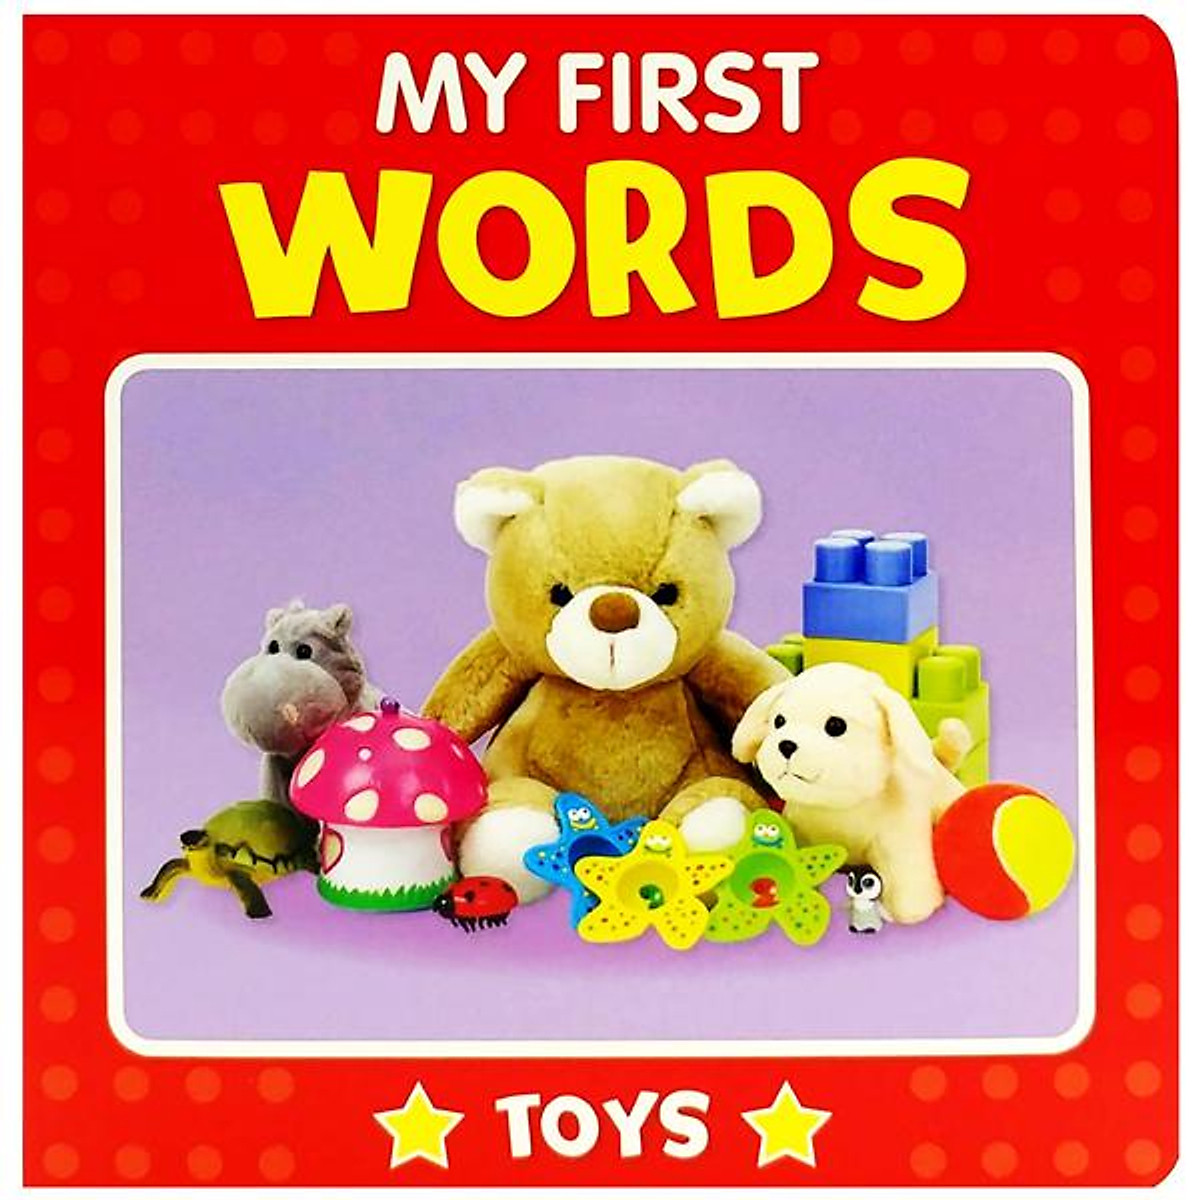 My First Words: Toys